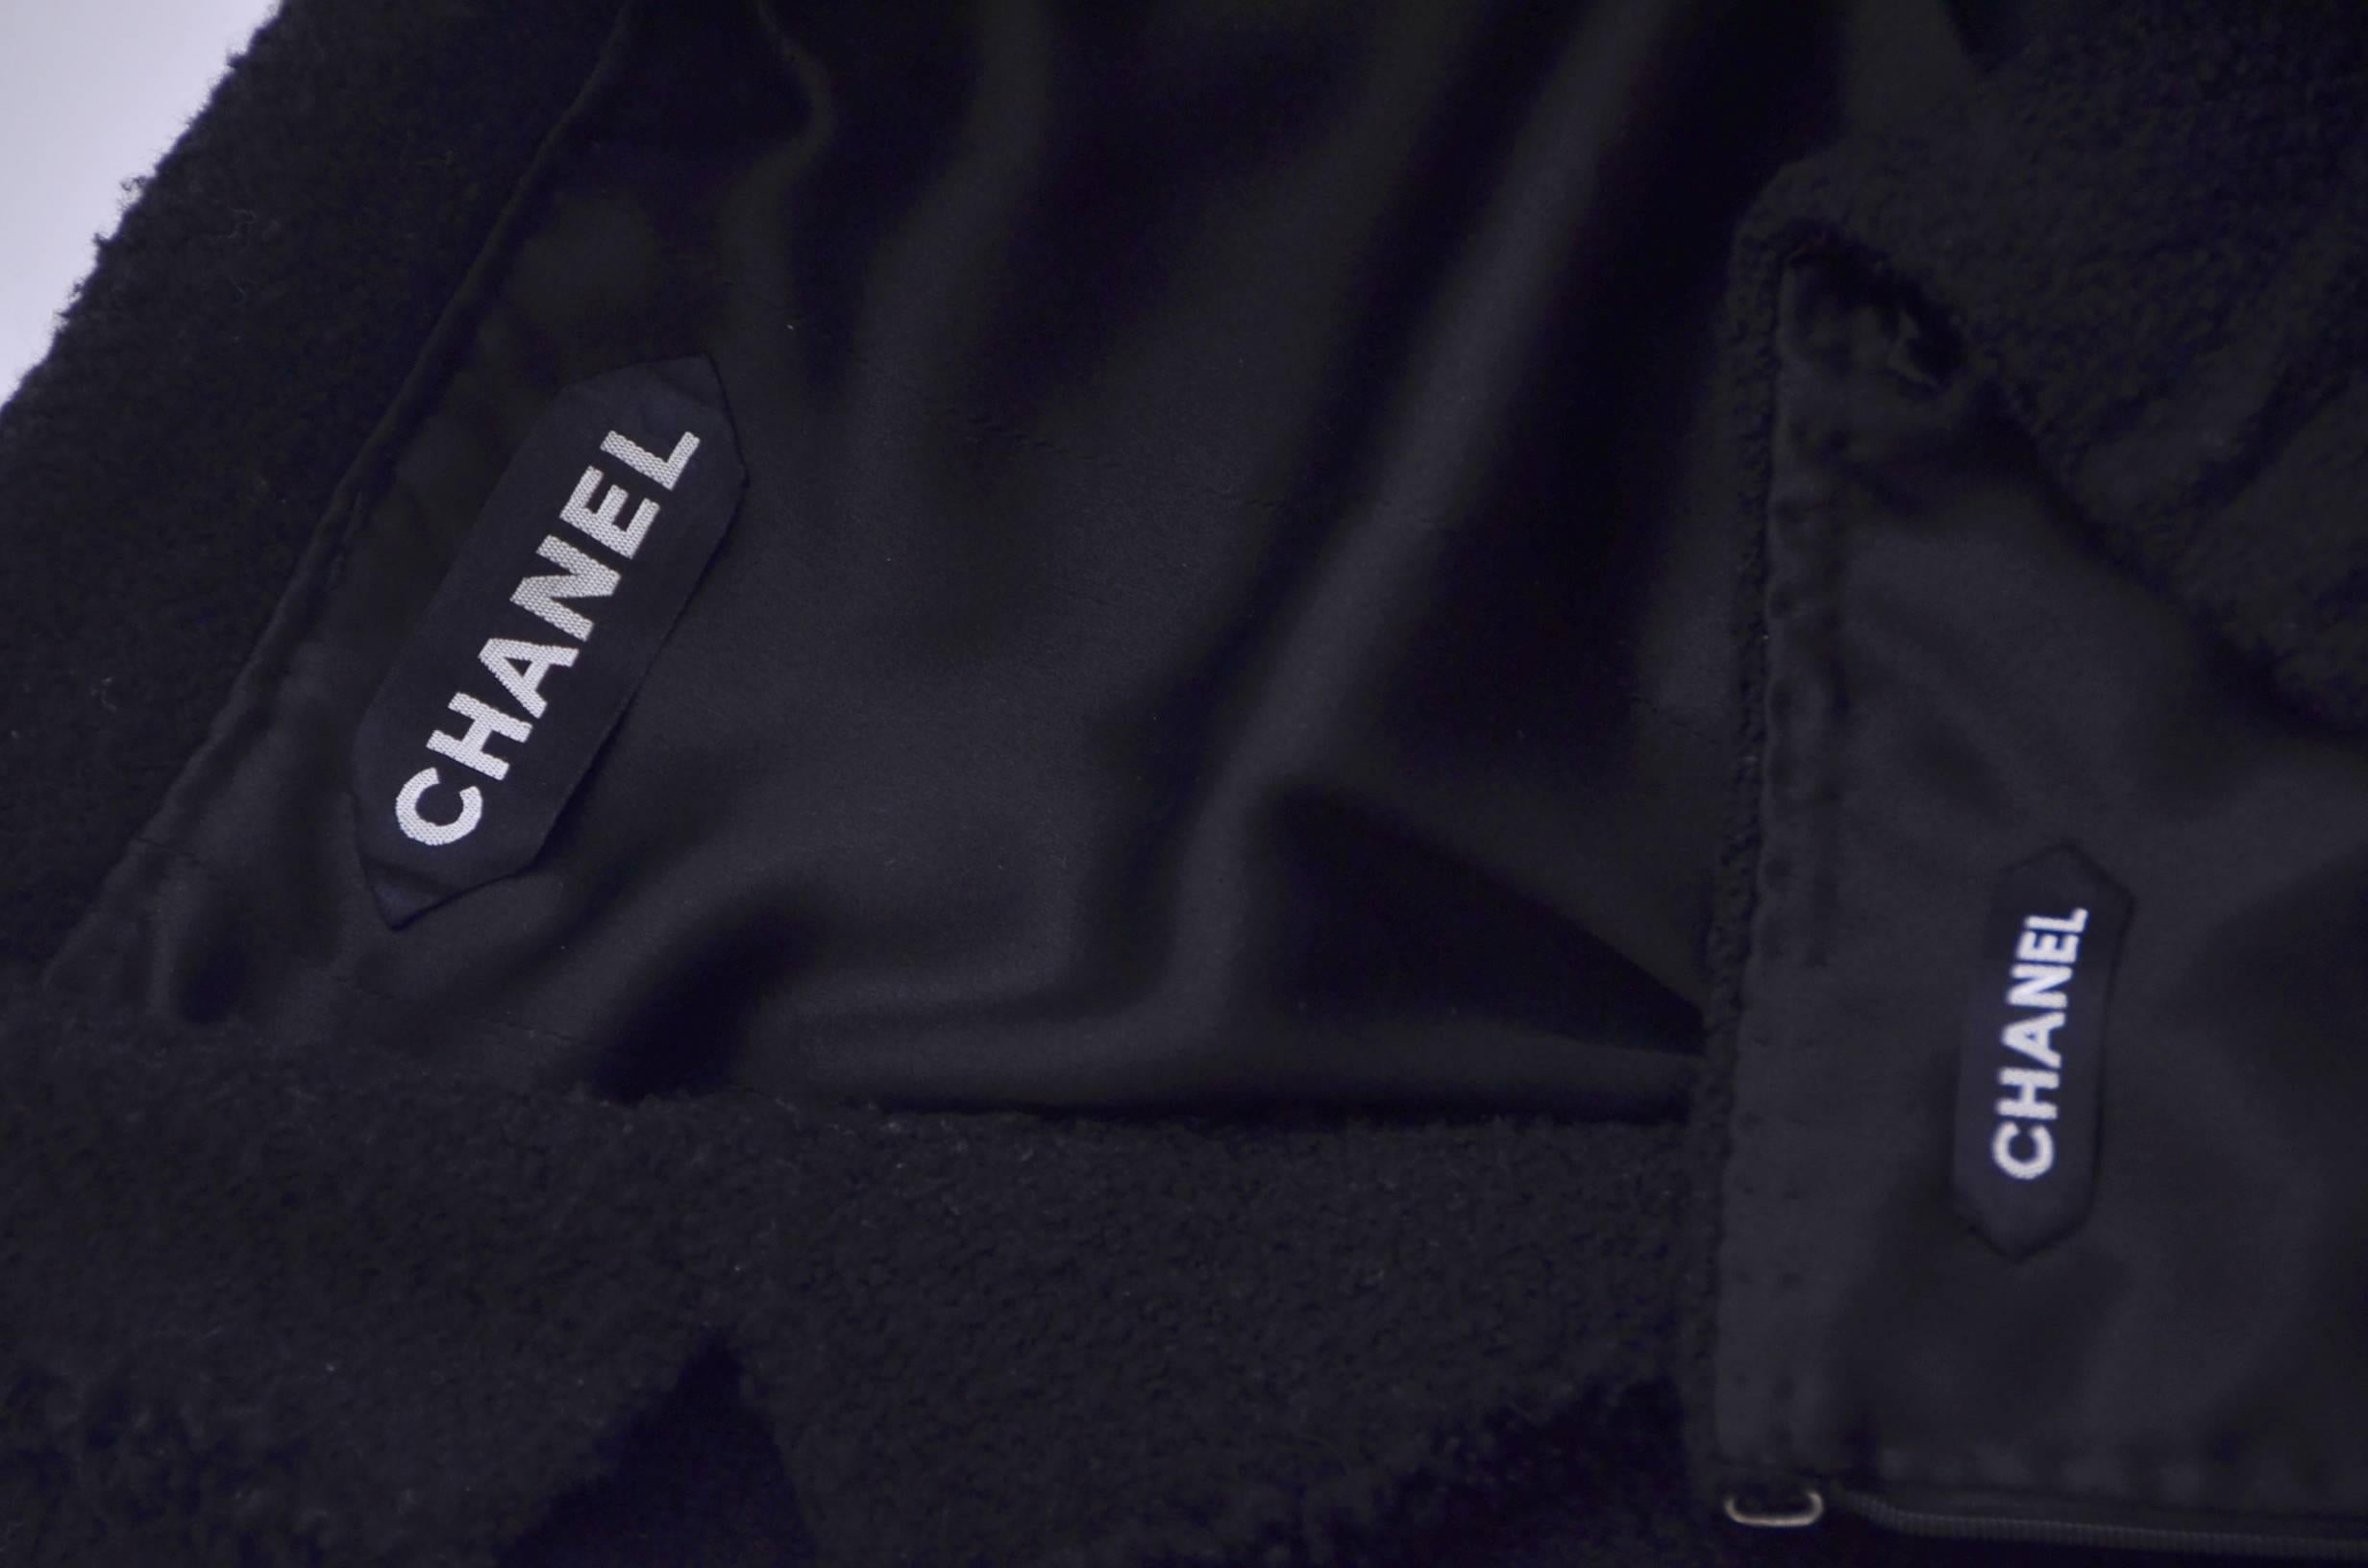 CHANEL Haute Couture Black Tweed Suit With Embellished Buttons Mint 3